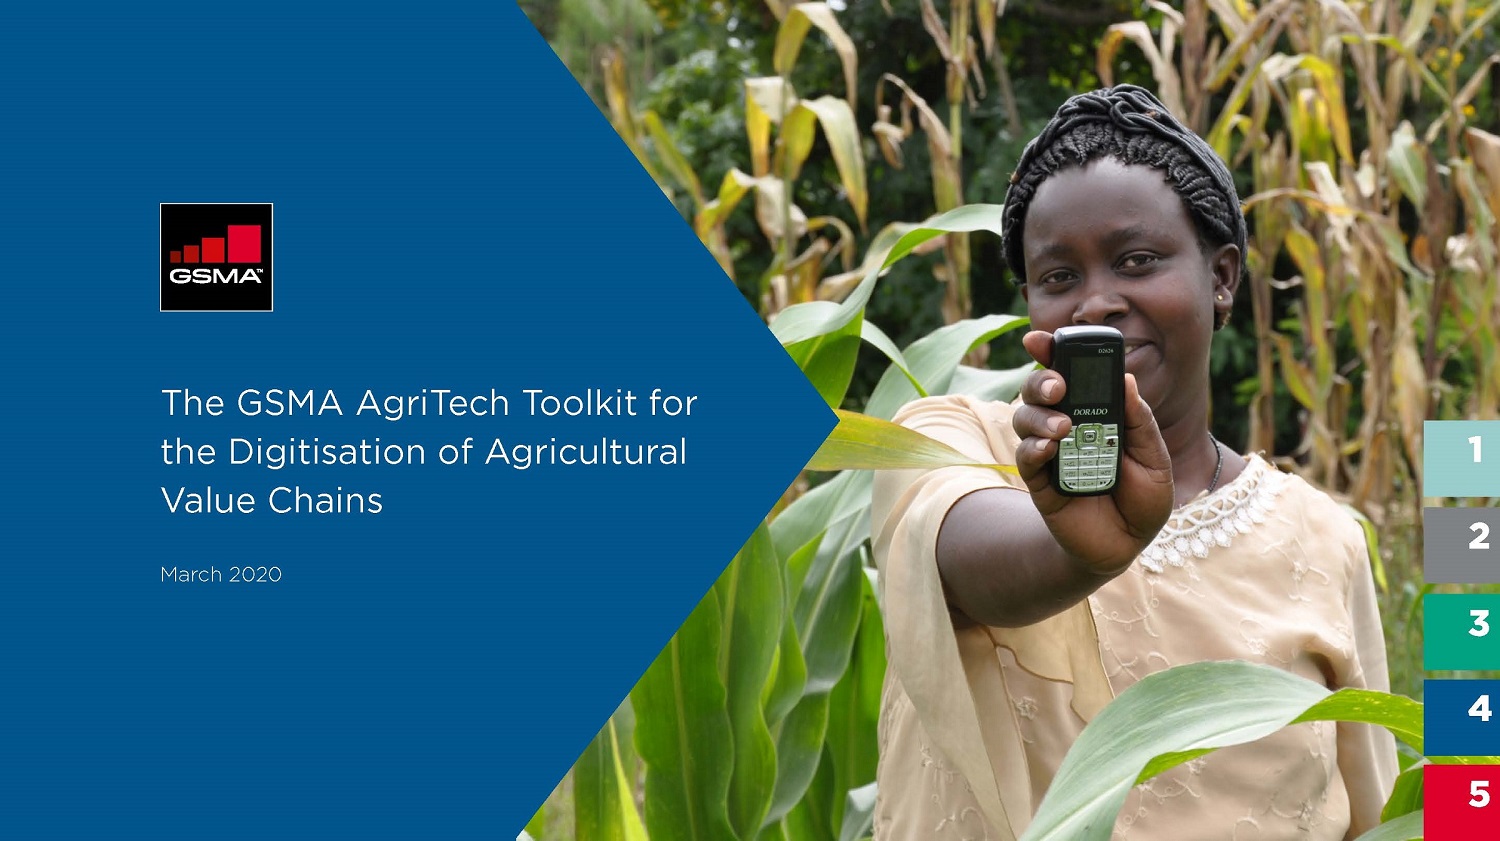 The GSMA AgriTech Toolkit for the digitisation of agricultural value chains image